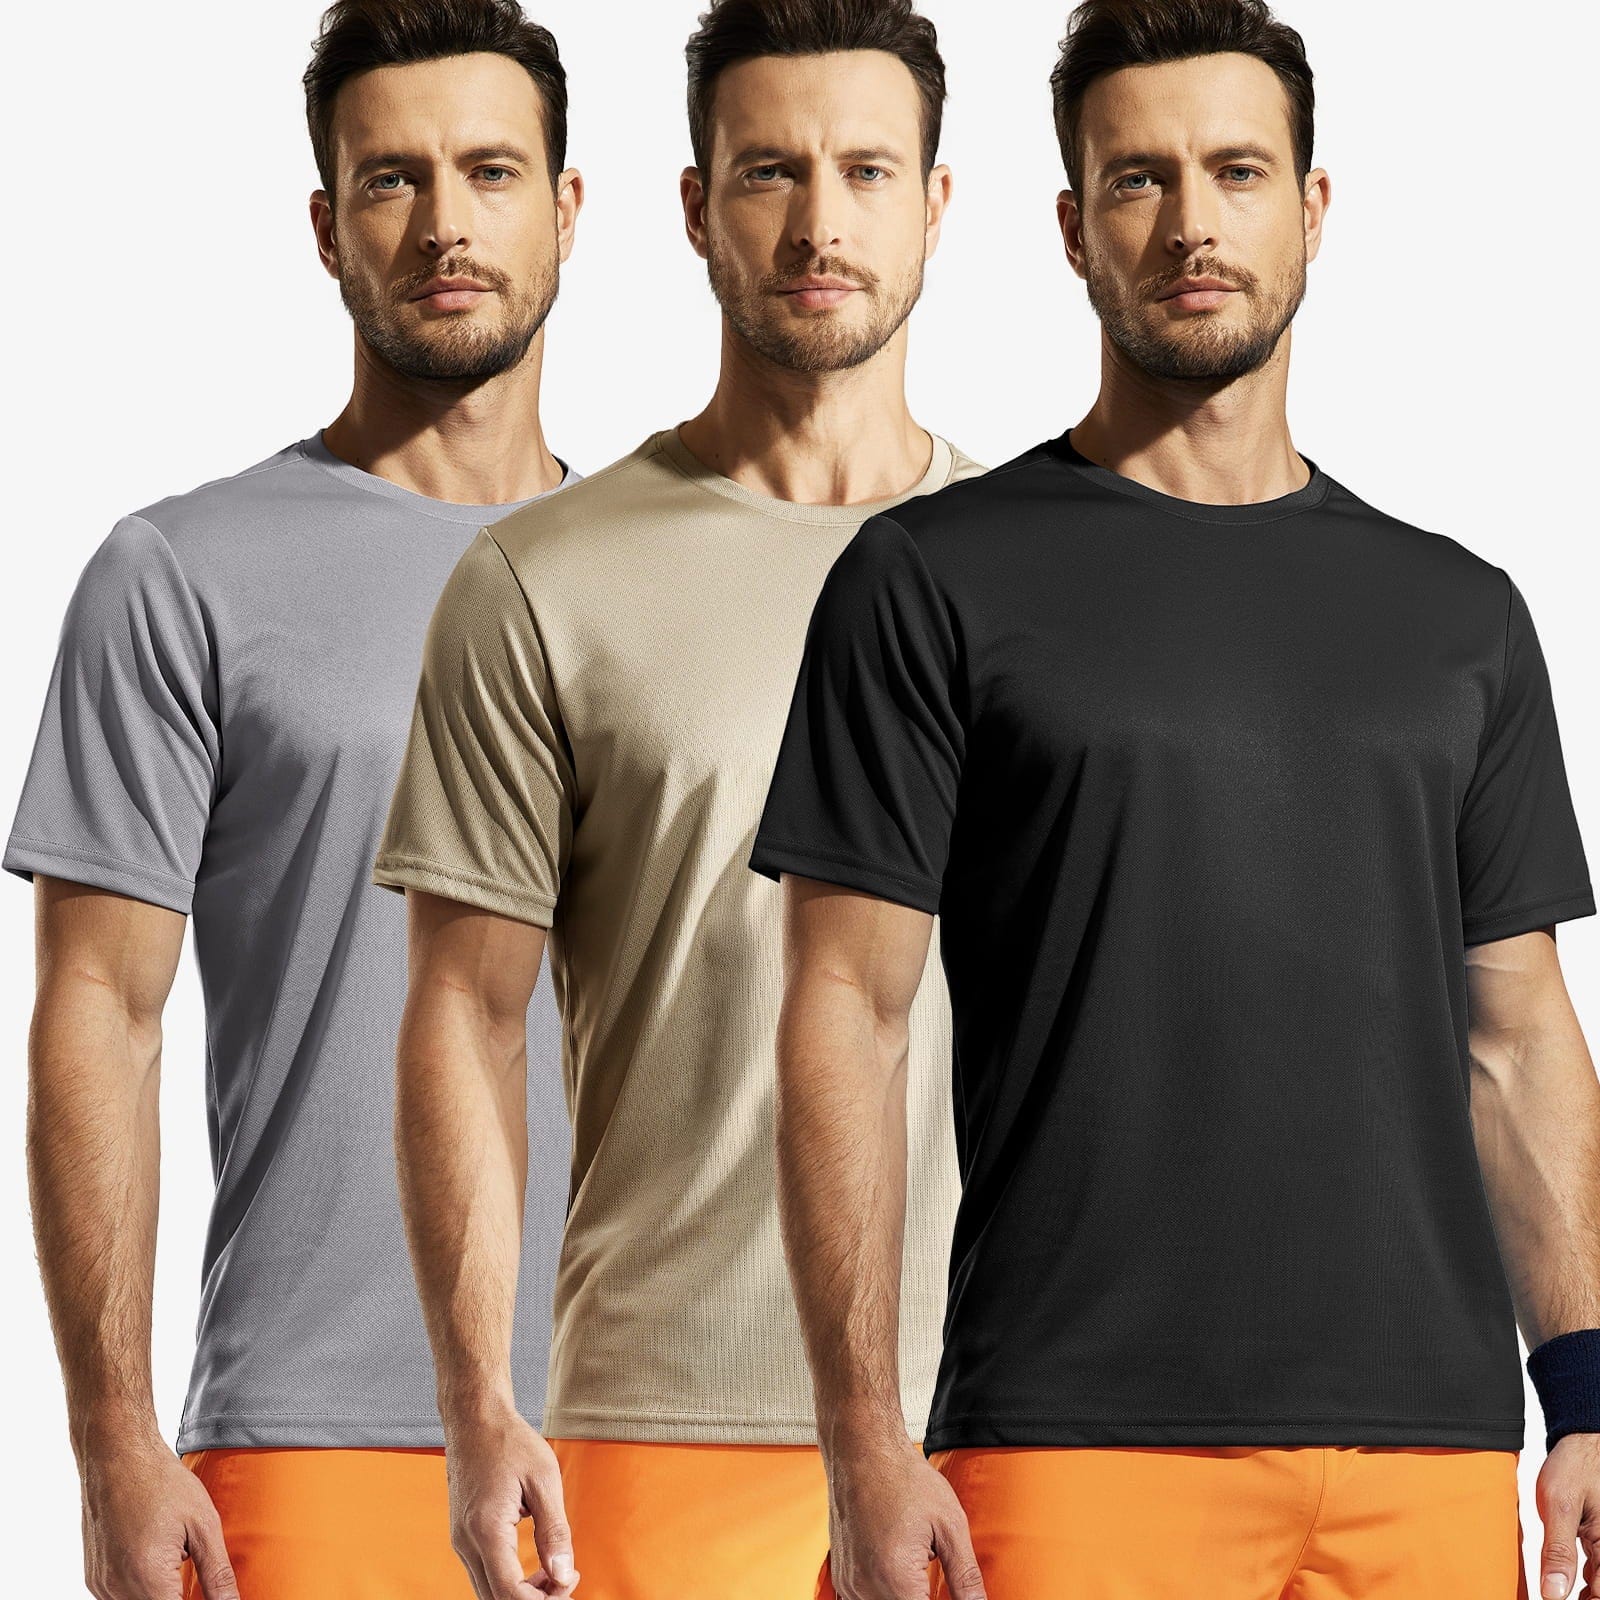 Men Dry Fit Workout T-shirts for Gym Athletic Running Men Shirts MIER